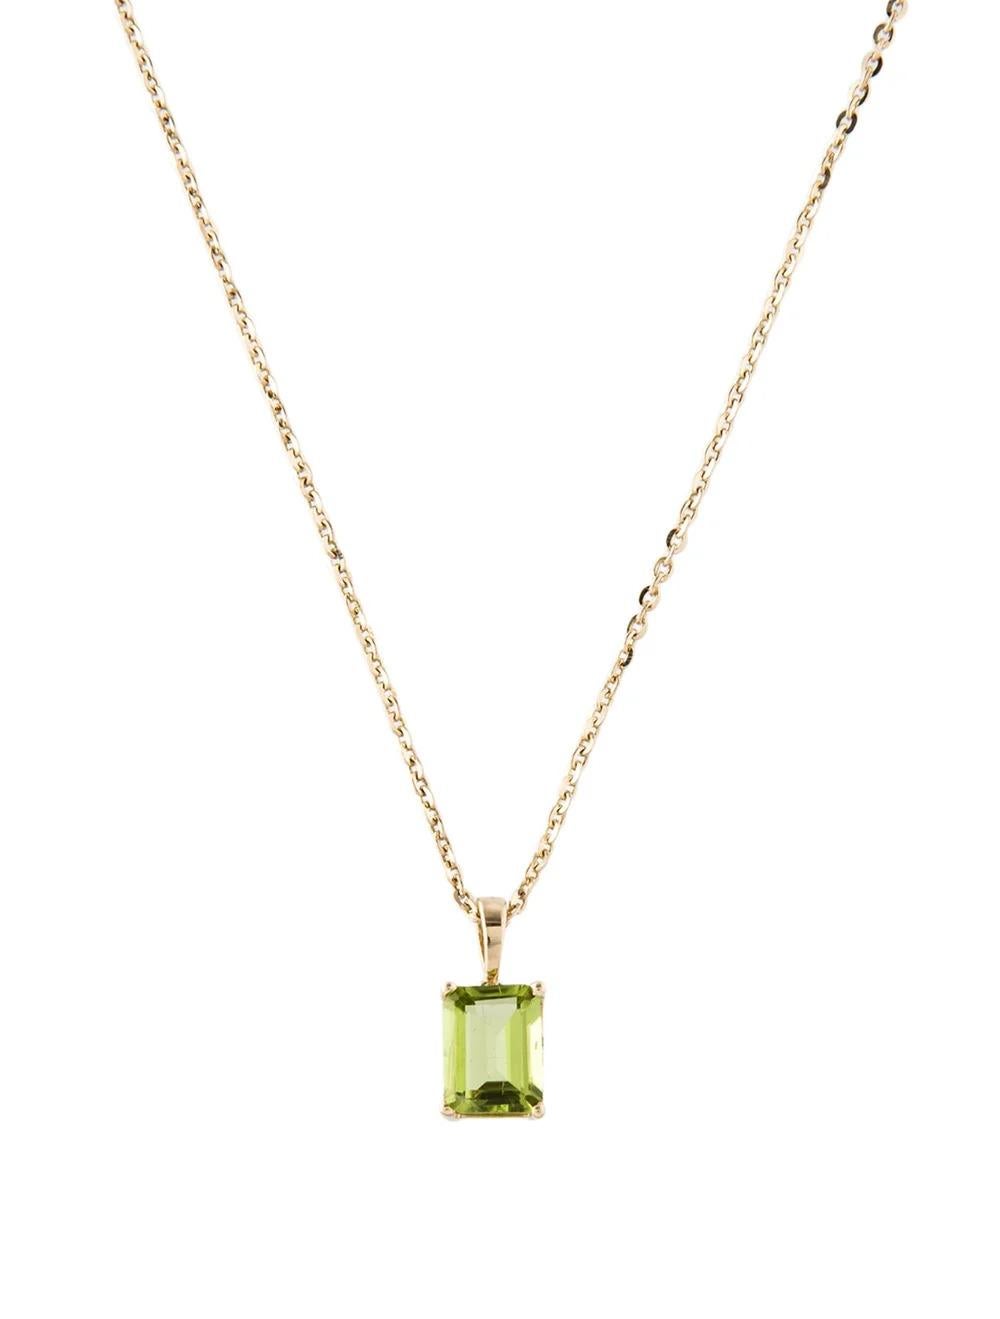 Indulge in the timeless elegance of our 14K Yellow Gold Peridot Pendant Necklace, featuring a dazzling 1.47 Carat Cut Cornered Rectangular Step Cut Peridot. Crafted with exquisite attention to detail, this necklace is a stunning addition to any